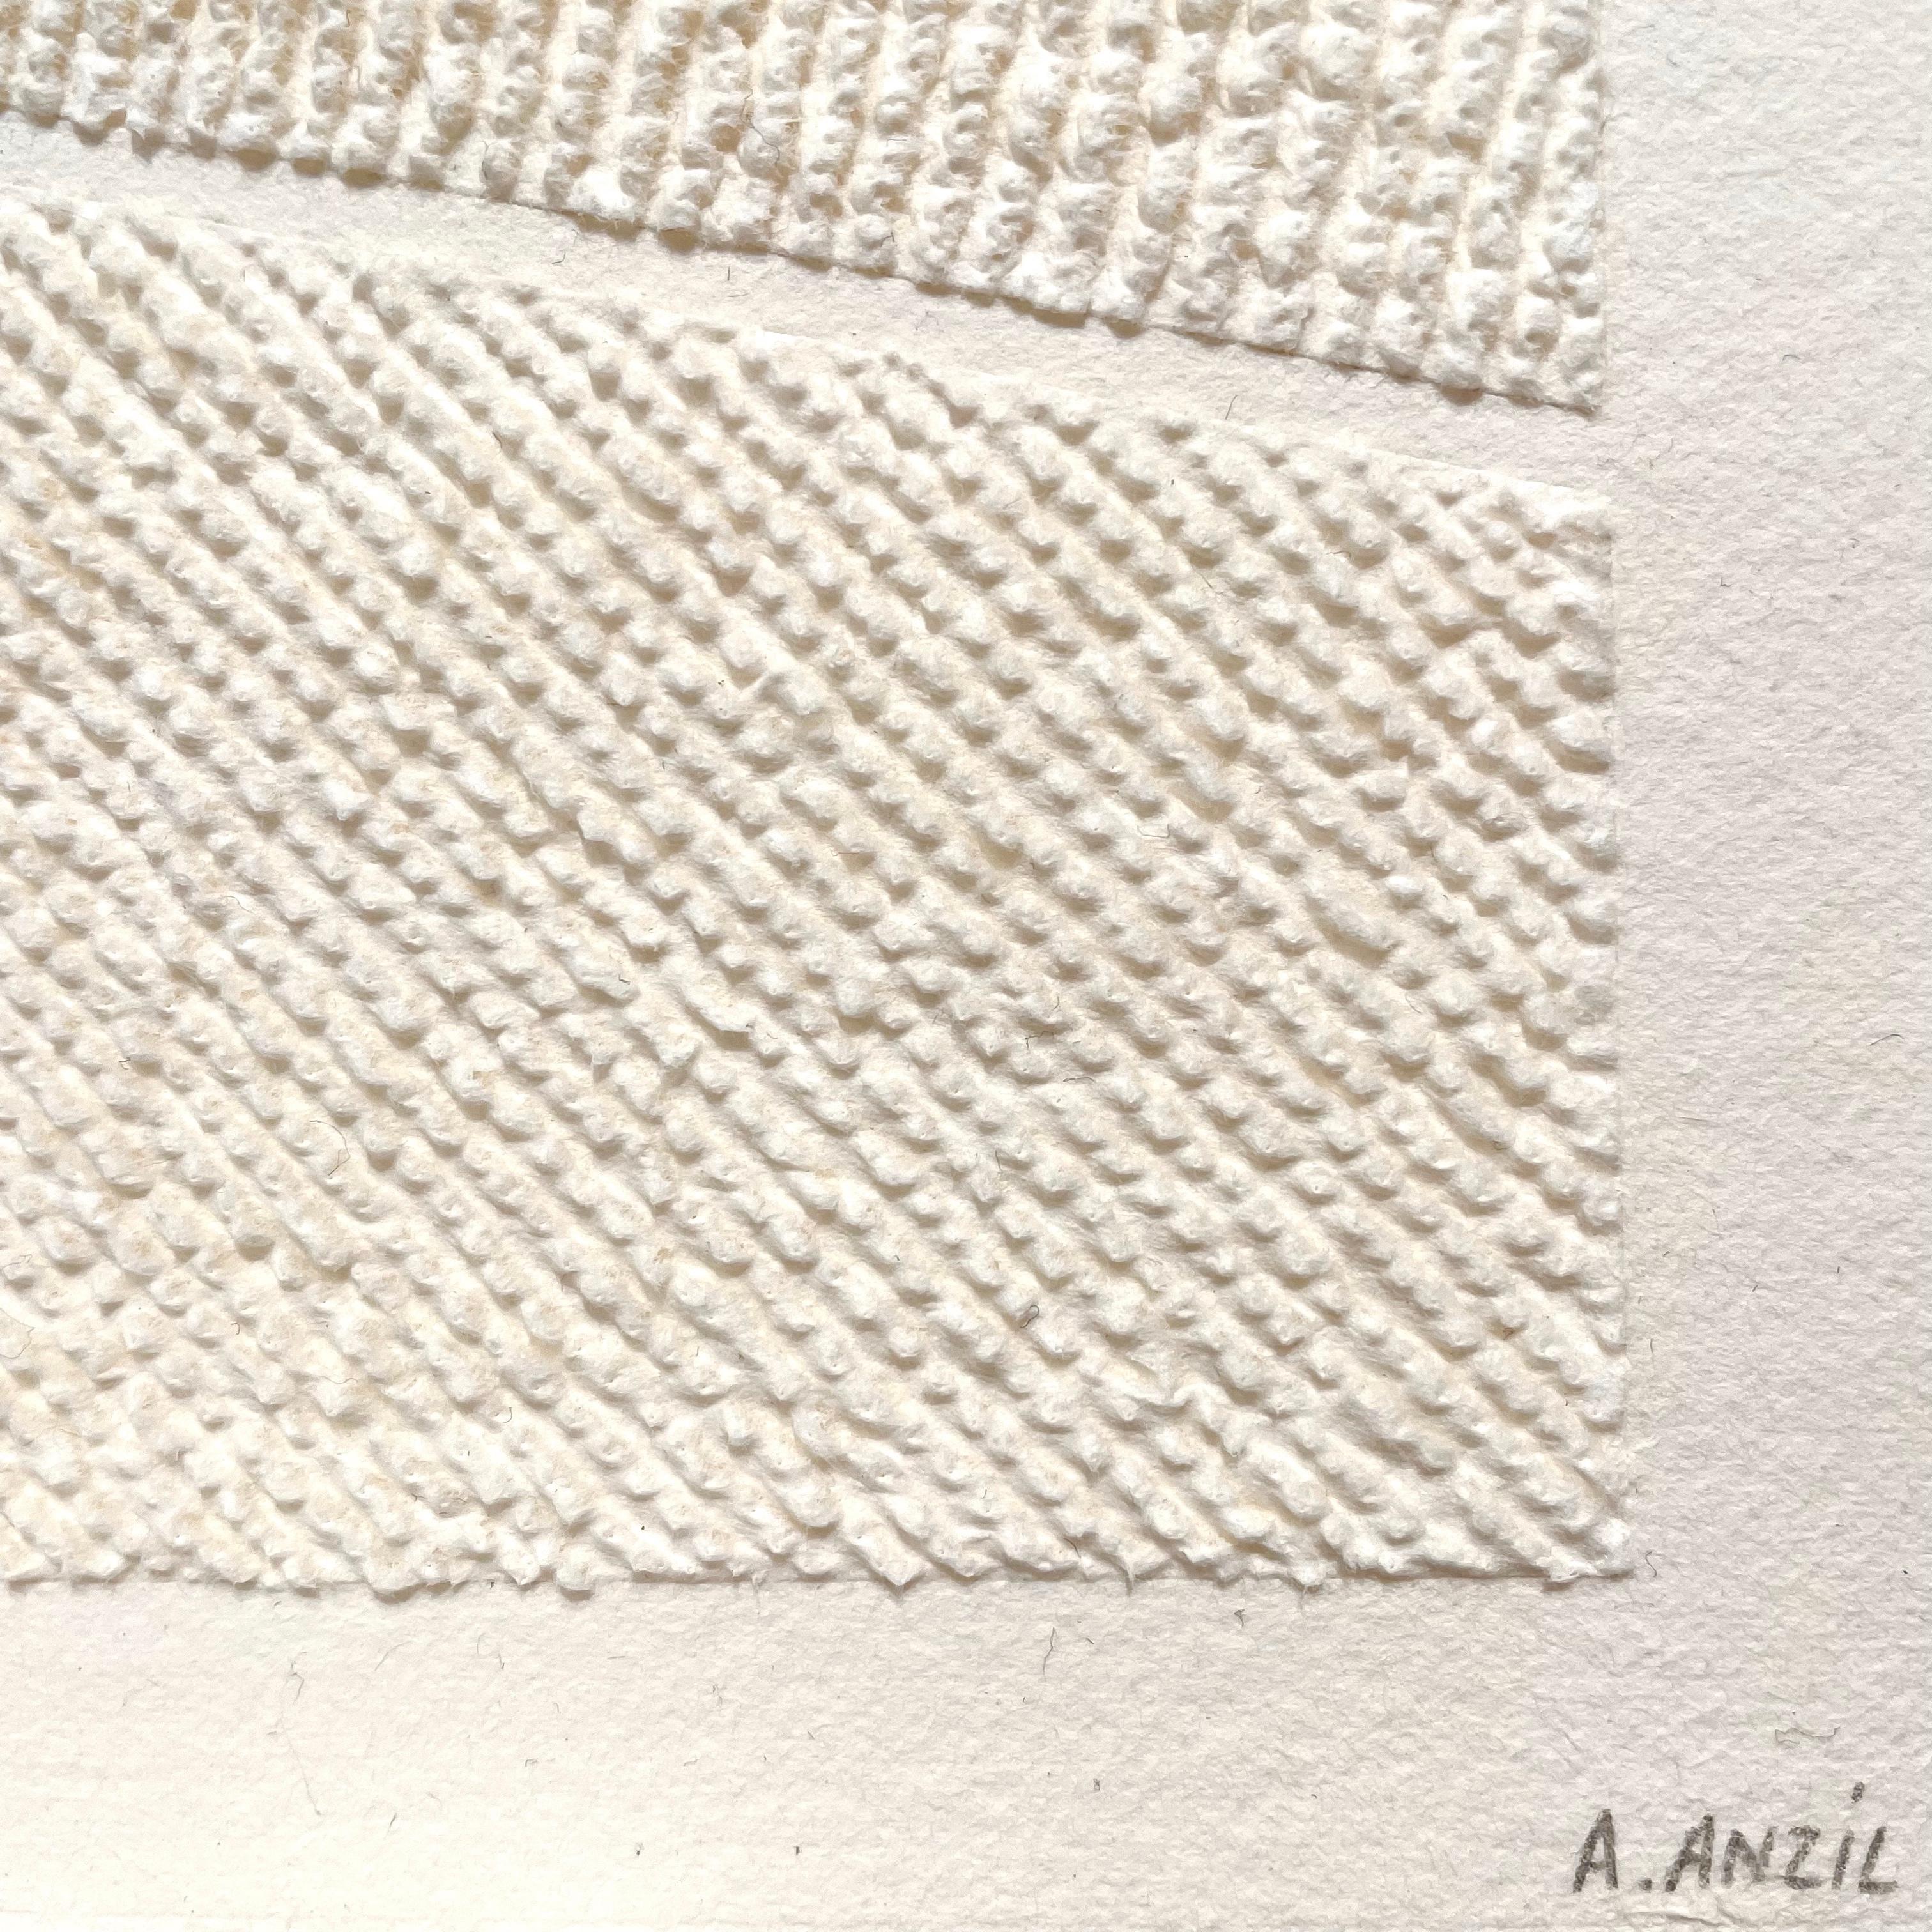 Finesse and delicateness are what best characterize Antonin Anzil’s artistic practice. Using a sharp tool to carefully pull the fiber of the paper from the front, the artist gives birth to three-dimensional relief that make abstract forms and